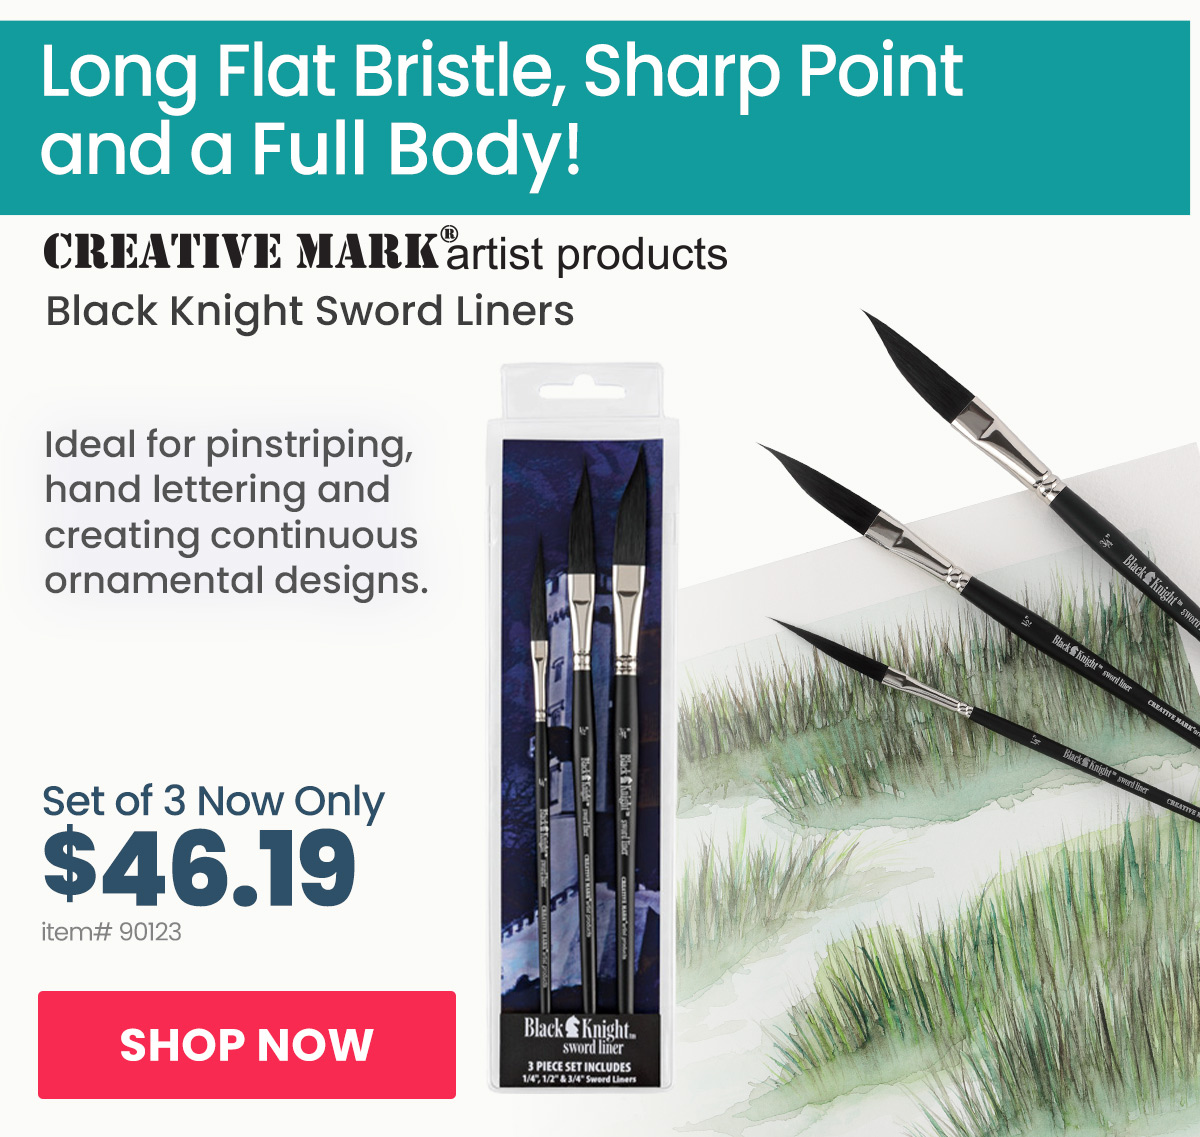 Black Knight Sword Liners By Creative Mark